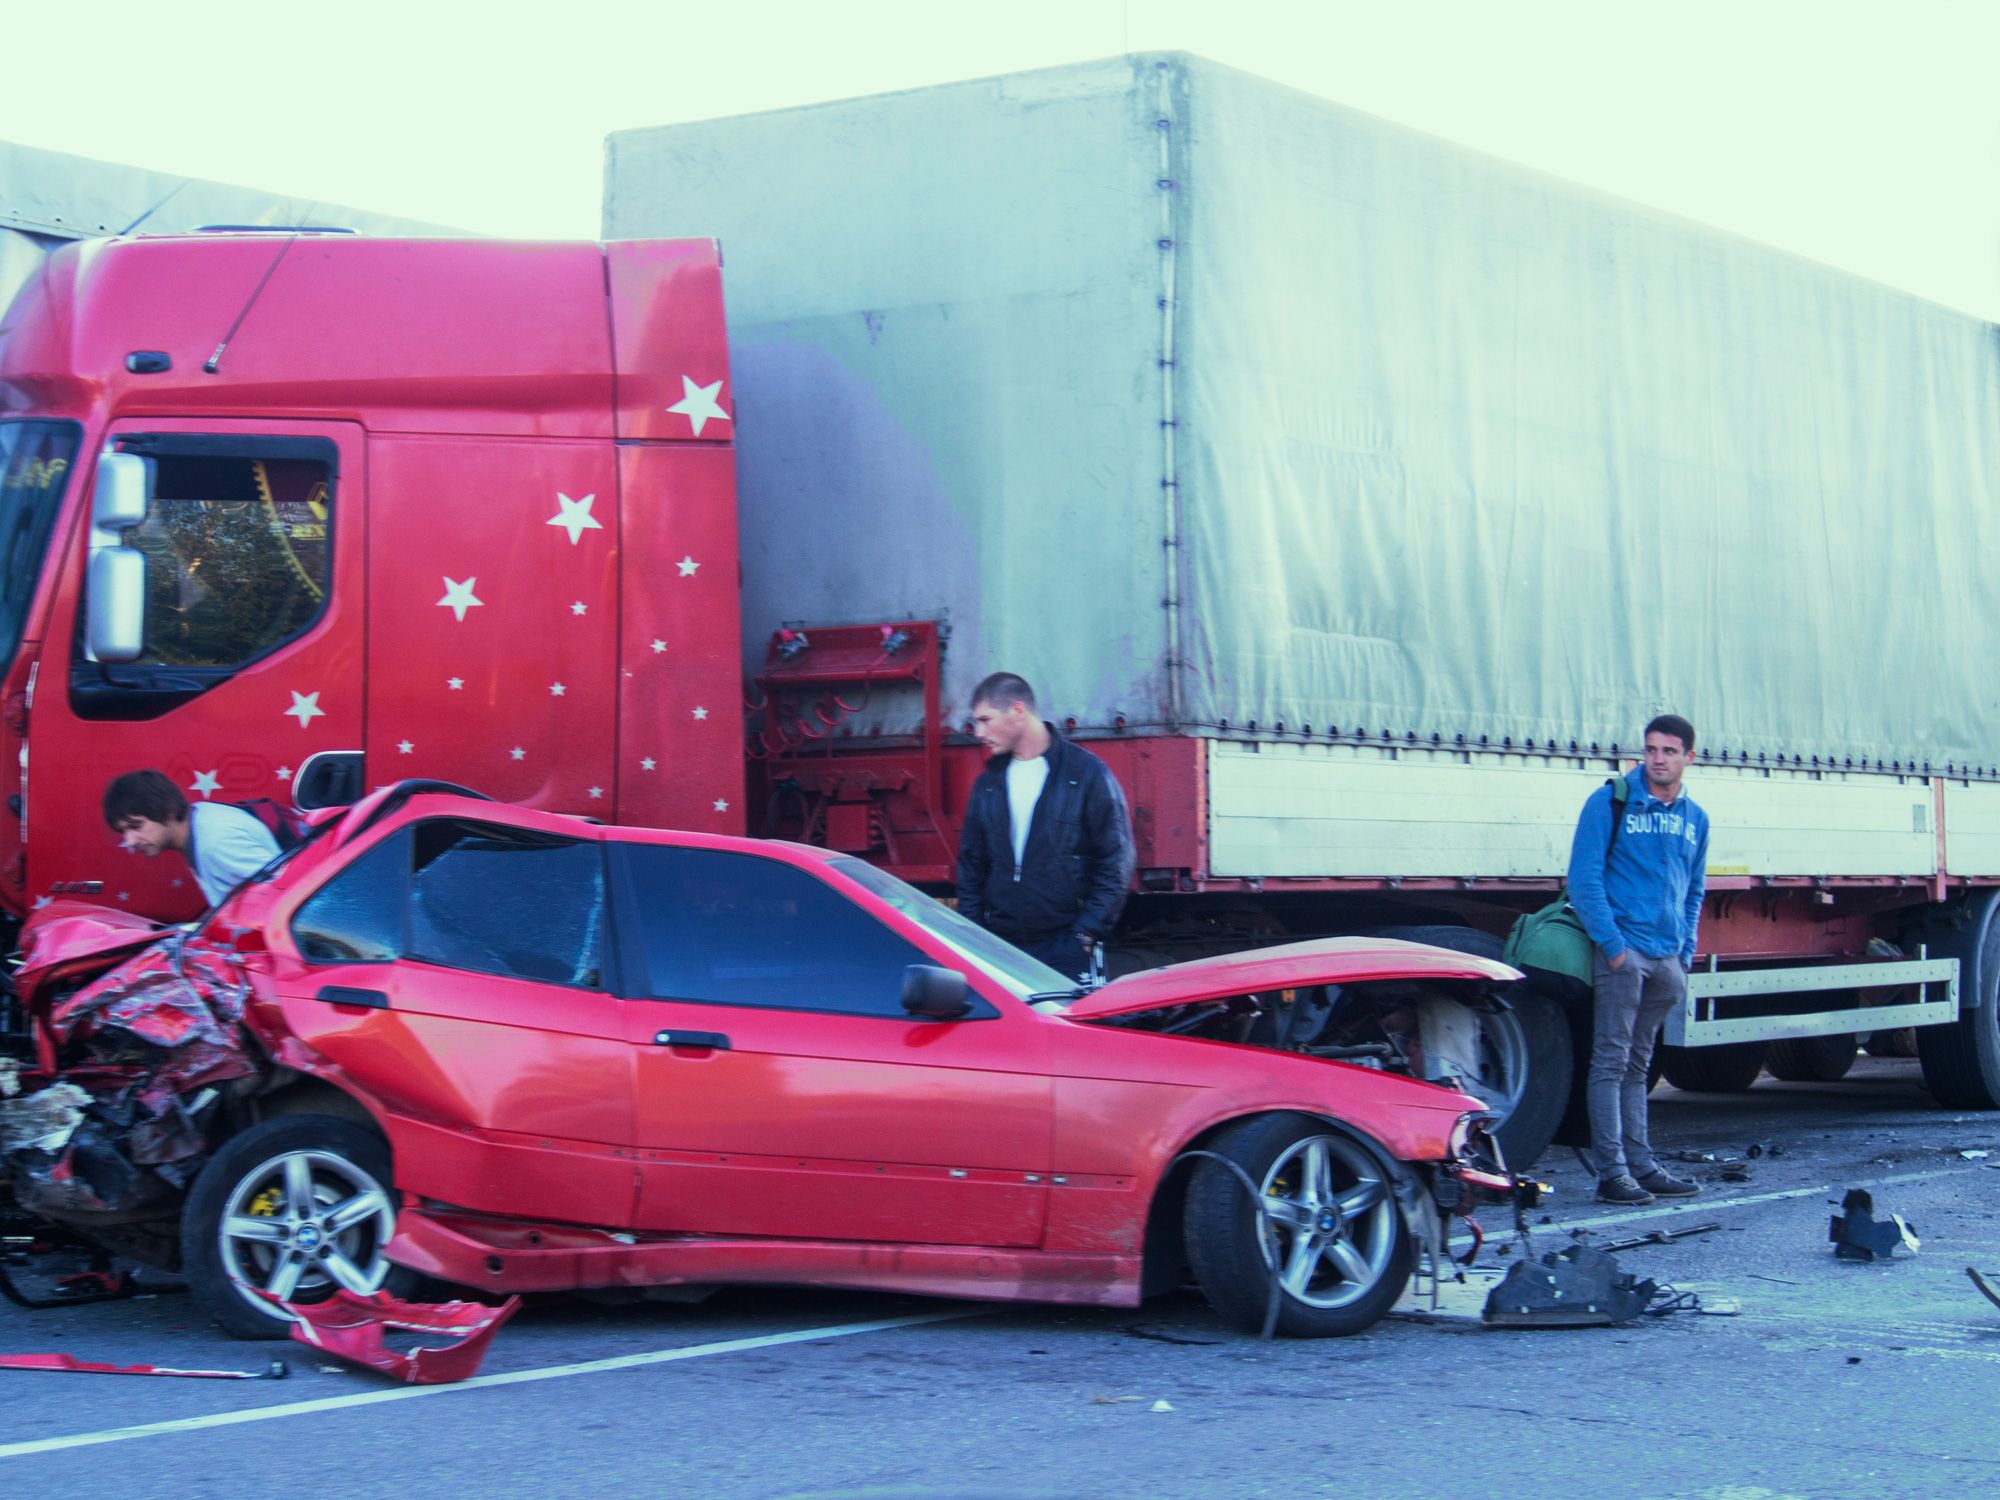 Three young man got into truck accident